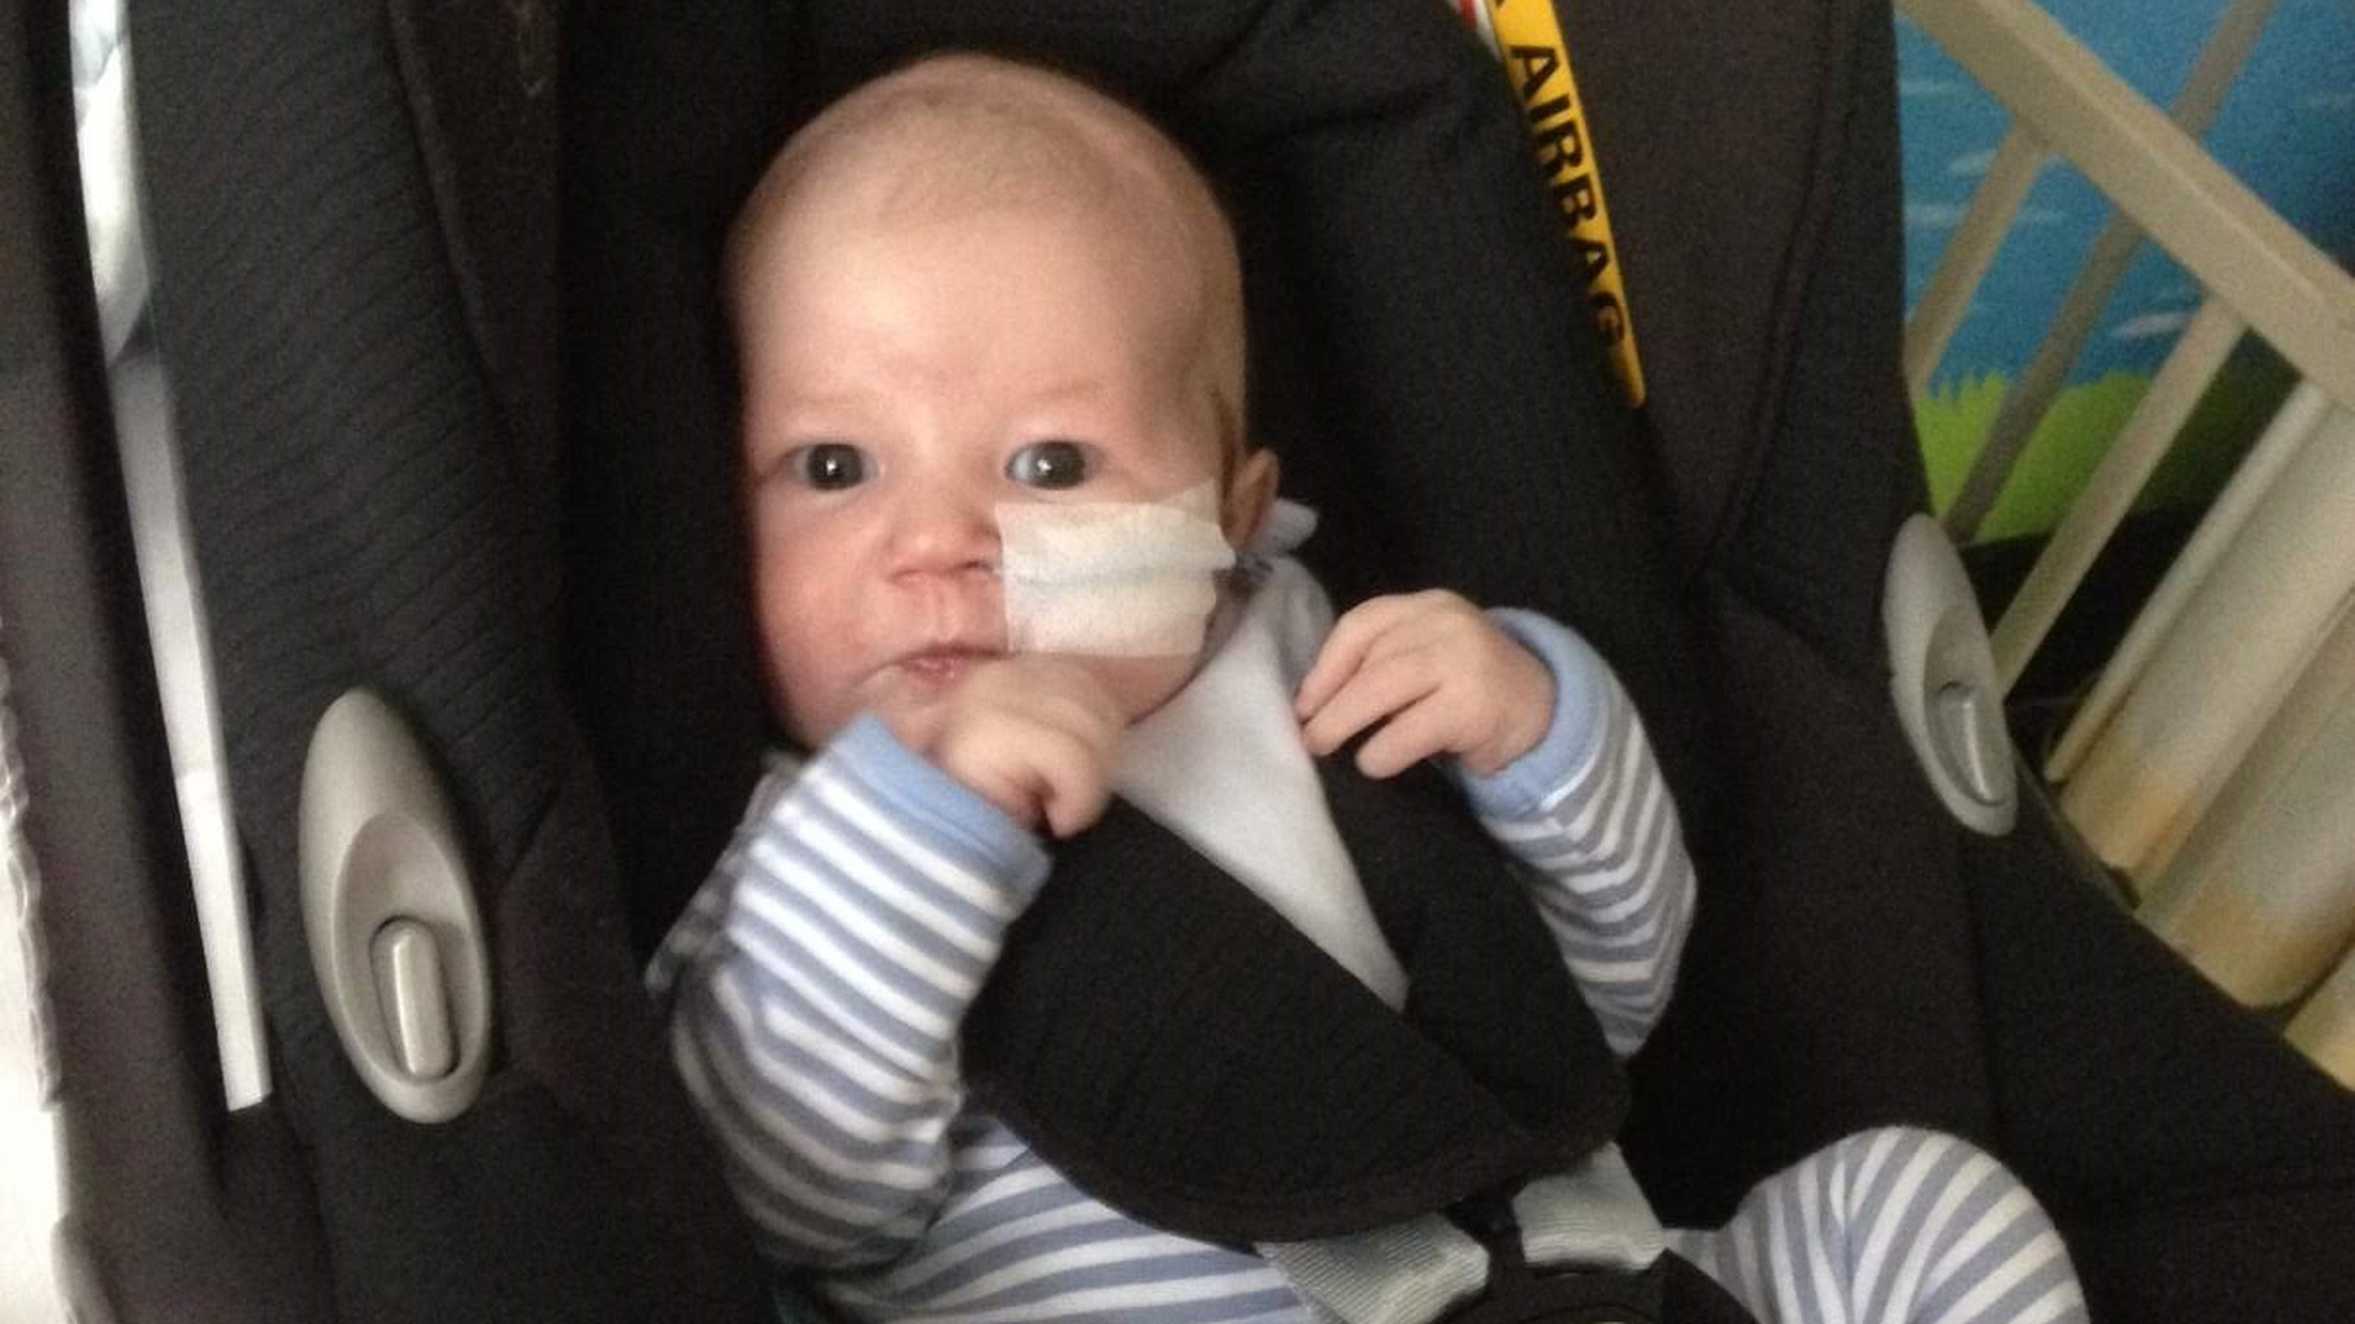 Scott when he was a baby, with a feeding tube in place.